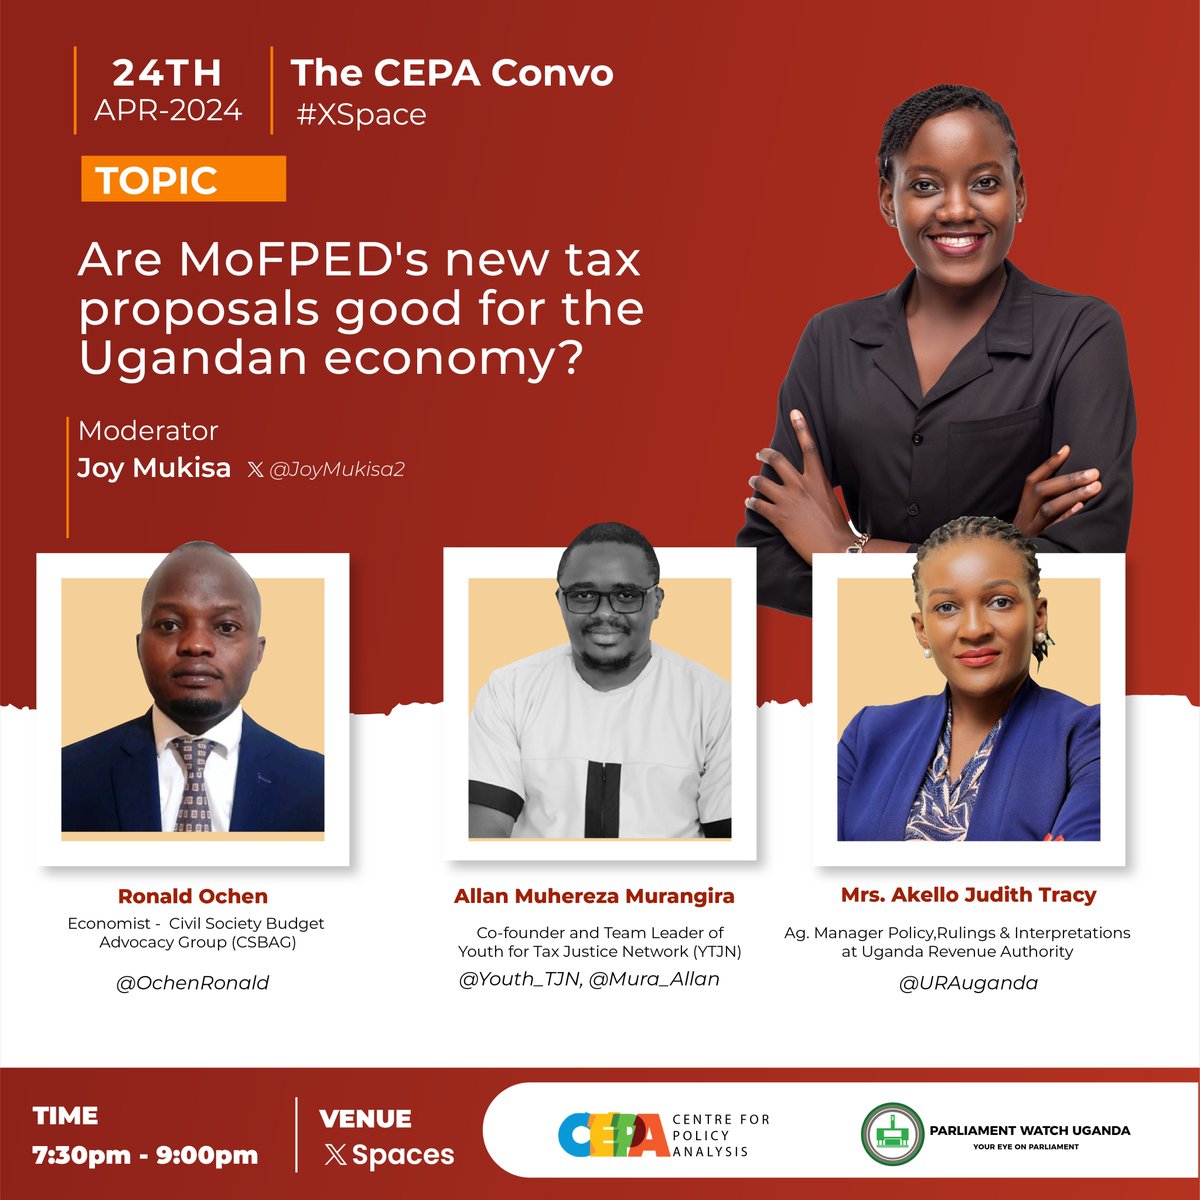 Set a reminder: x.com/i/spaces/1rmxp… Join us today at 7:30 PM on #TheCEPAConvo to discuss whether @mofpedU's new tax proposals are good and applicable to the Ugandan economy. For this conversation, we will be joined by: * @OchenRonald - An Economist with @CSBAGUGANDA. *